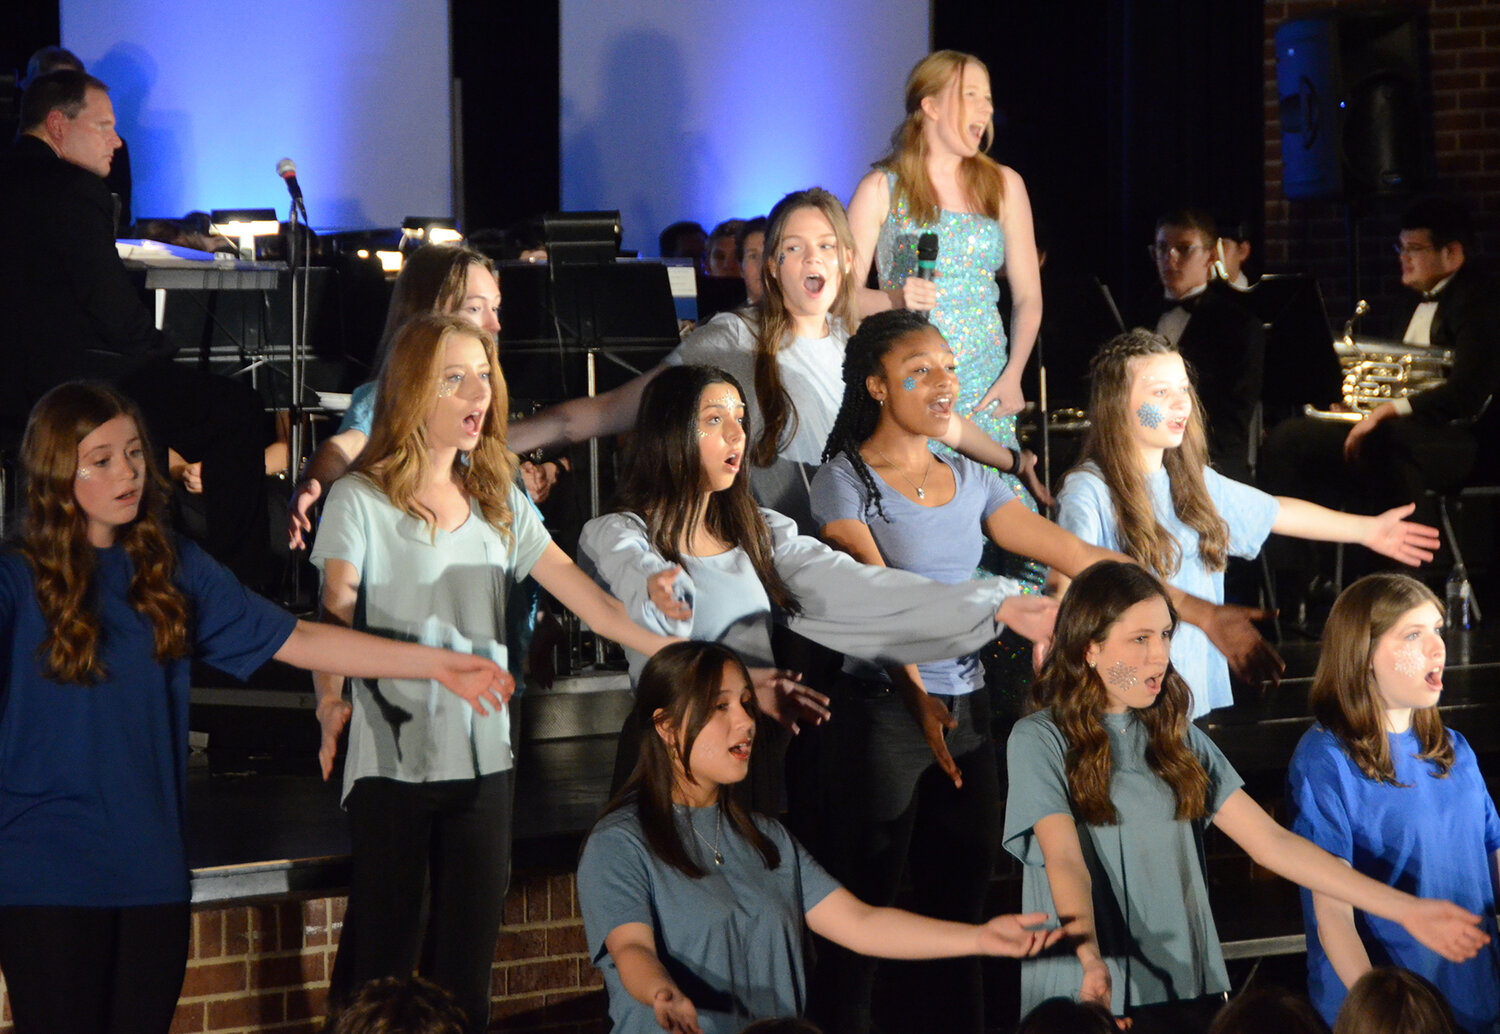 Choir members added vocals to the performance.